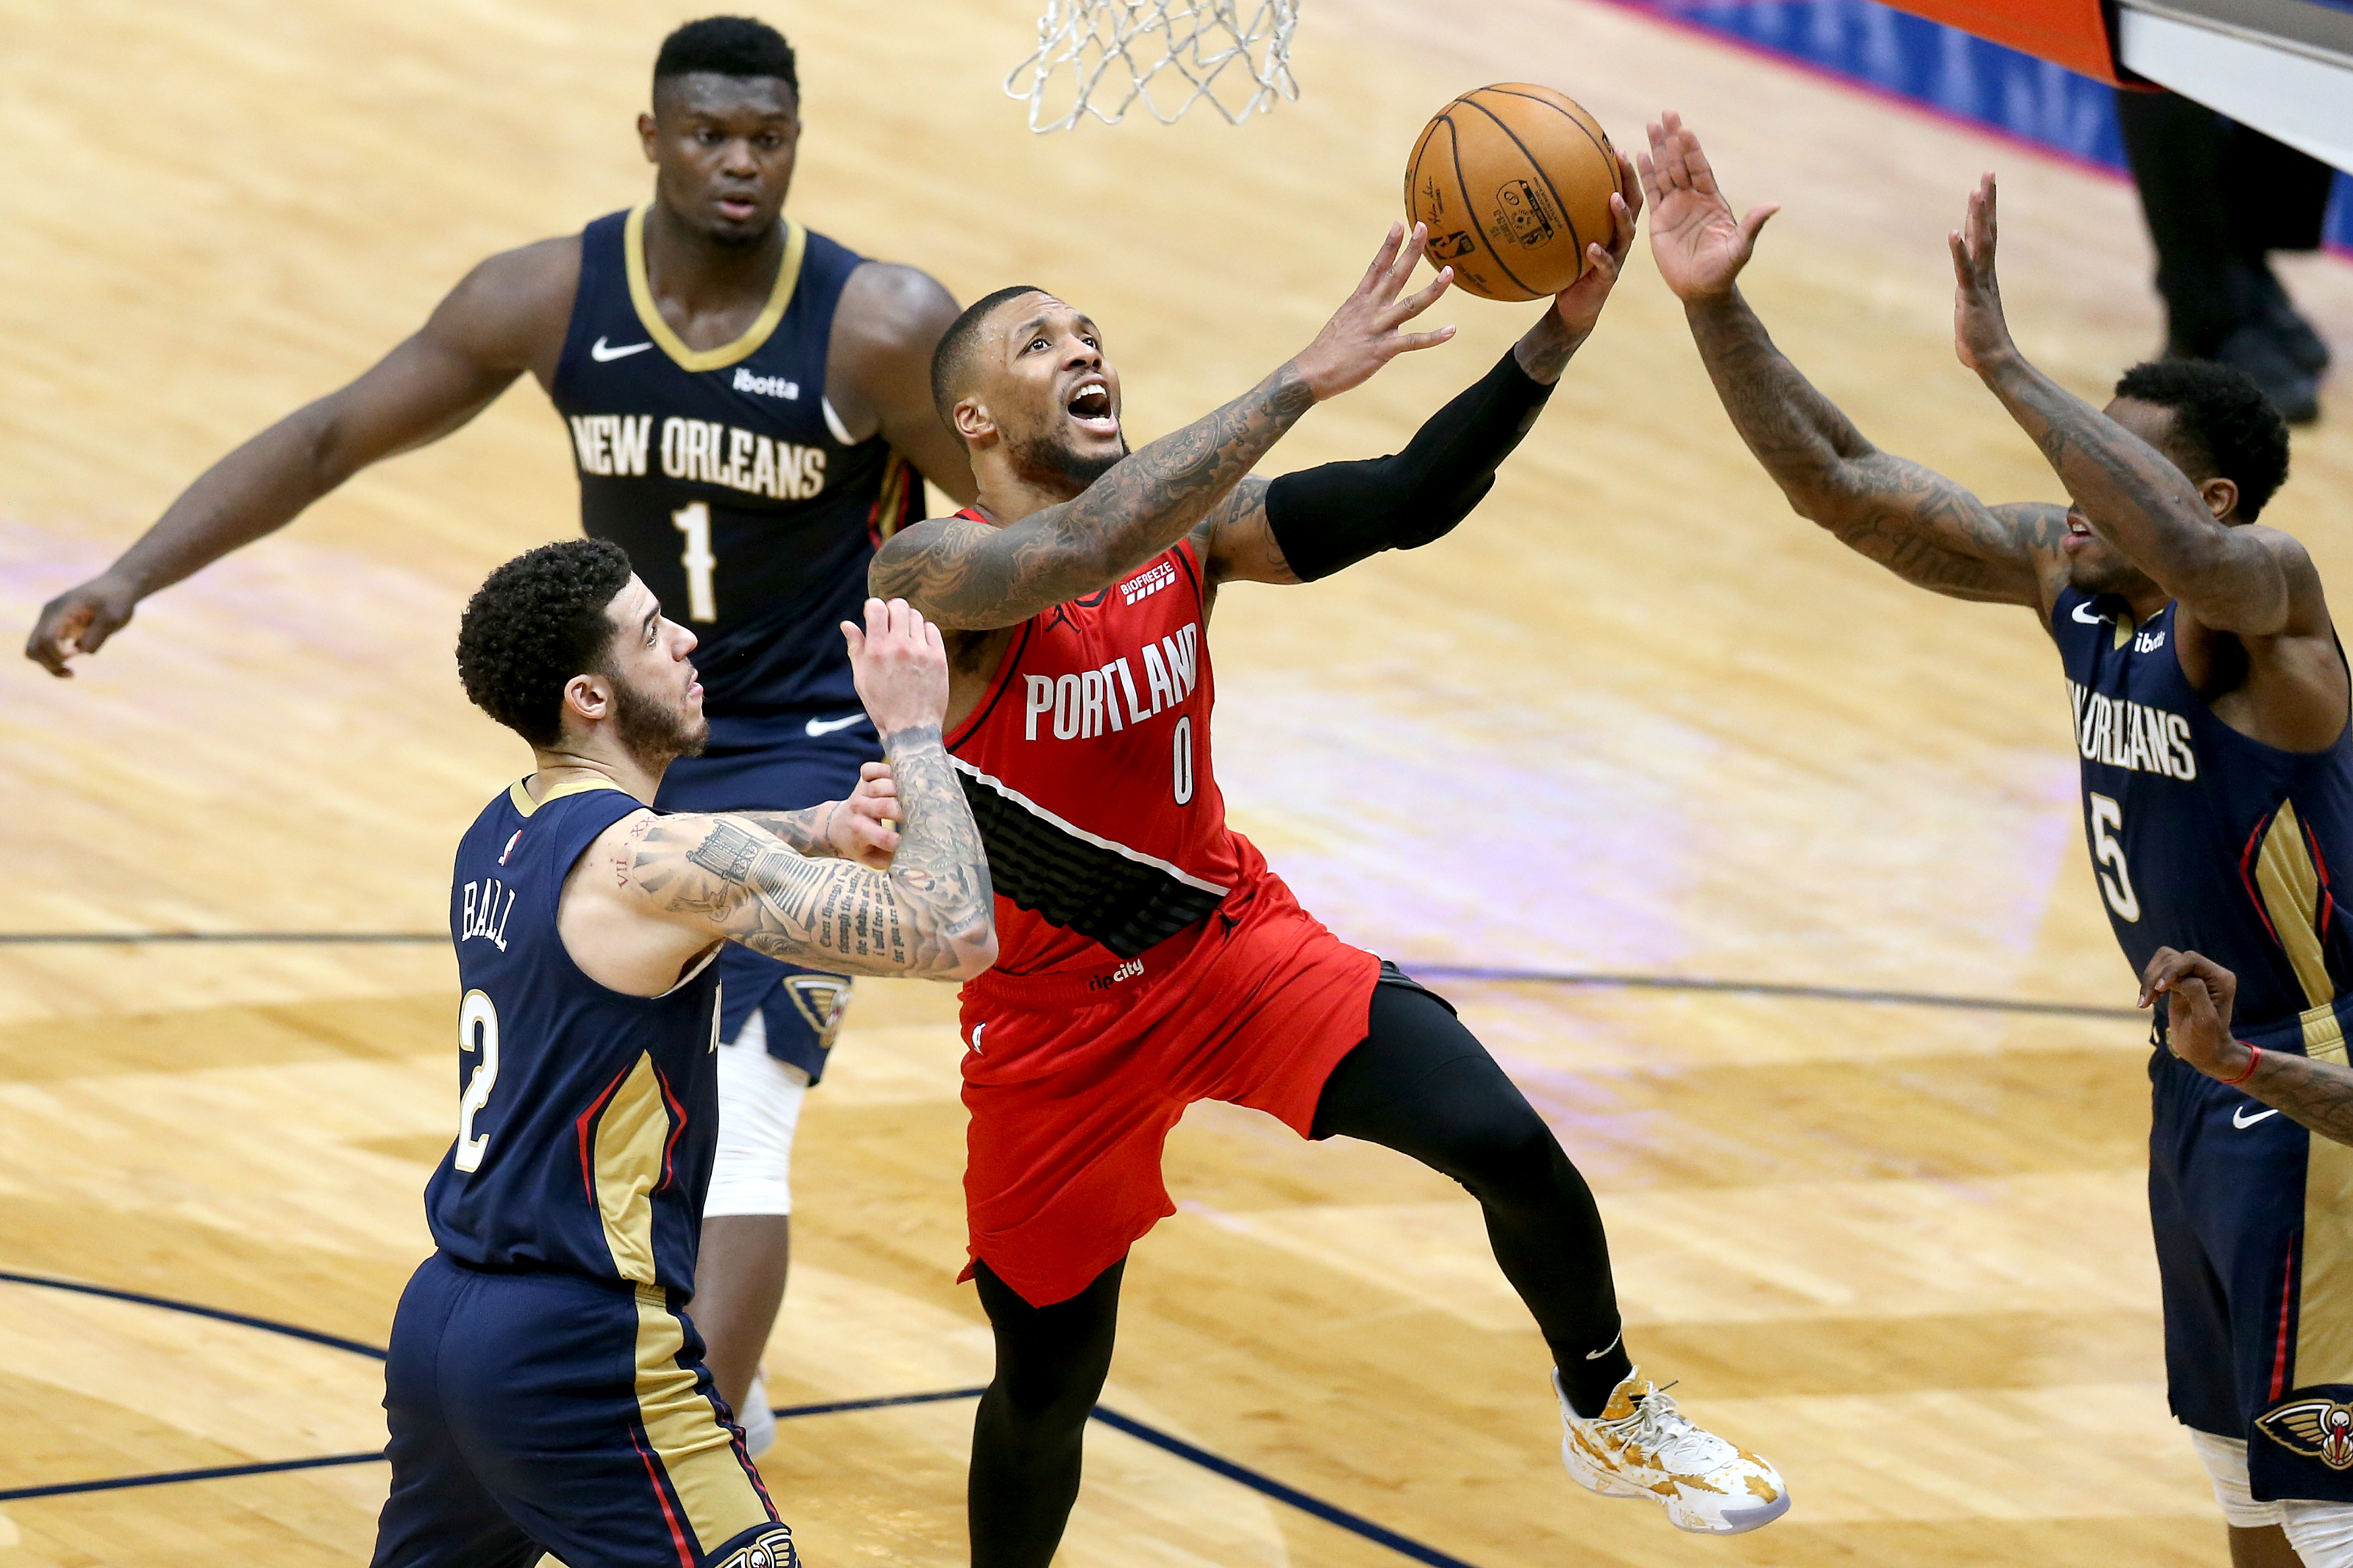 Blazers' Damian Lillard is the new 3-point contest king at the NBA